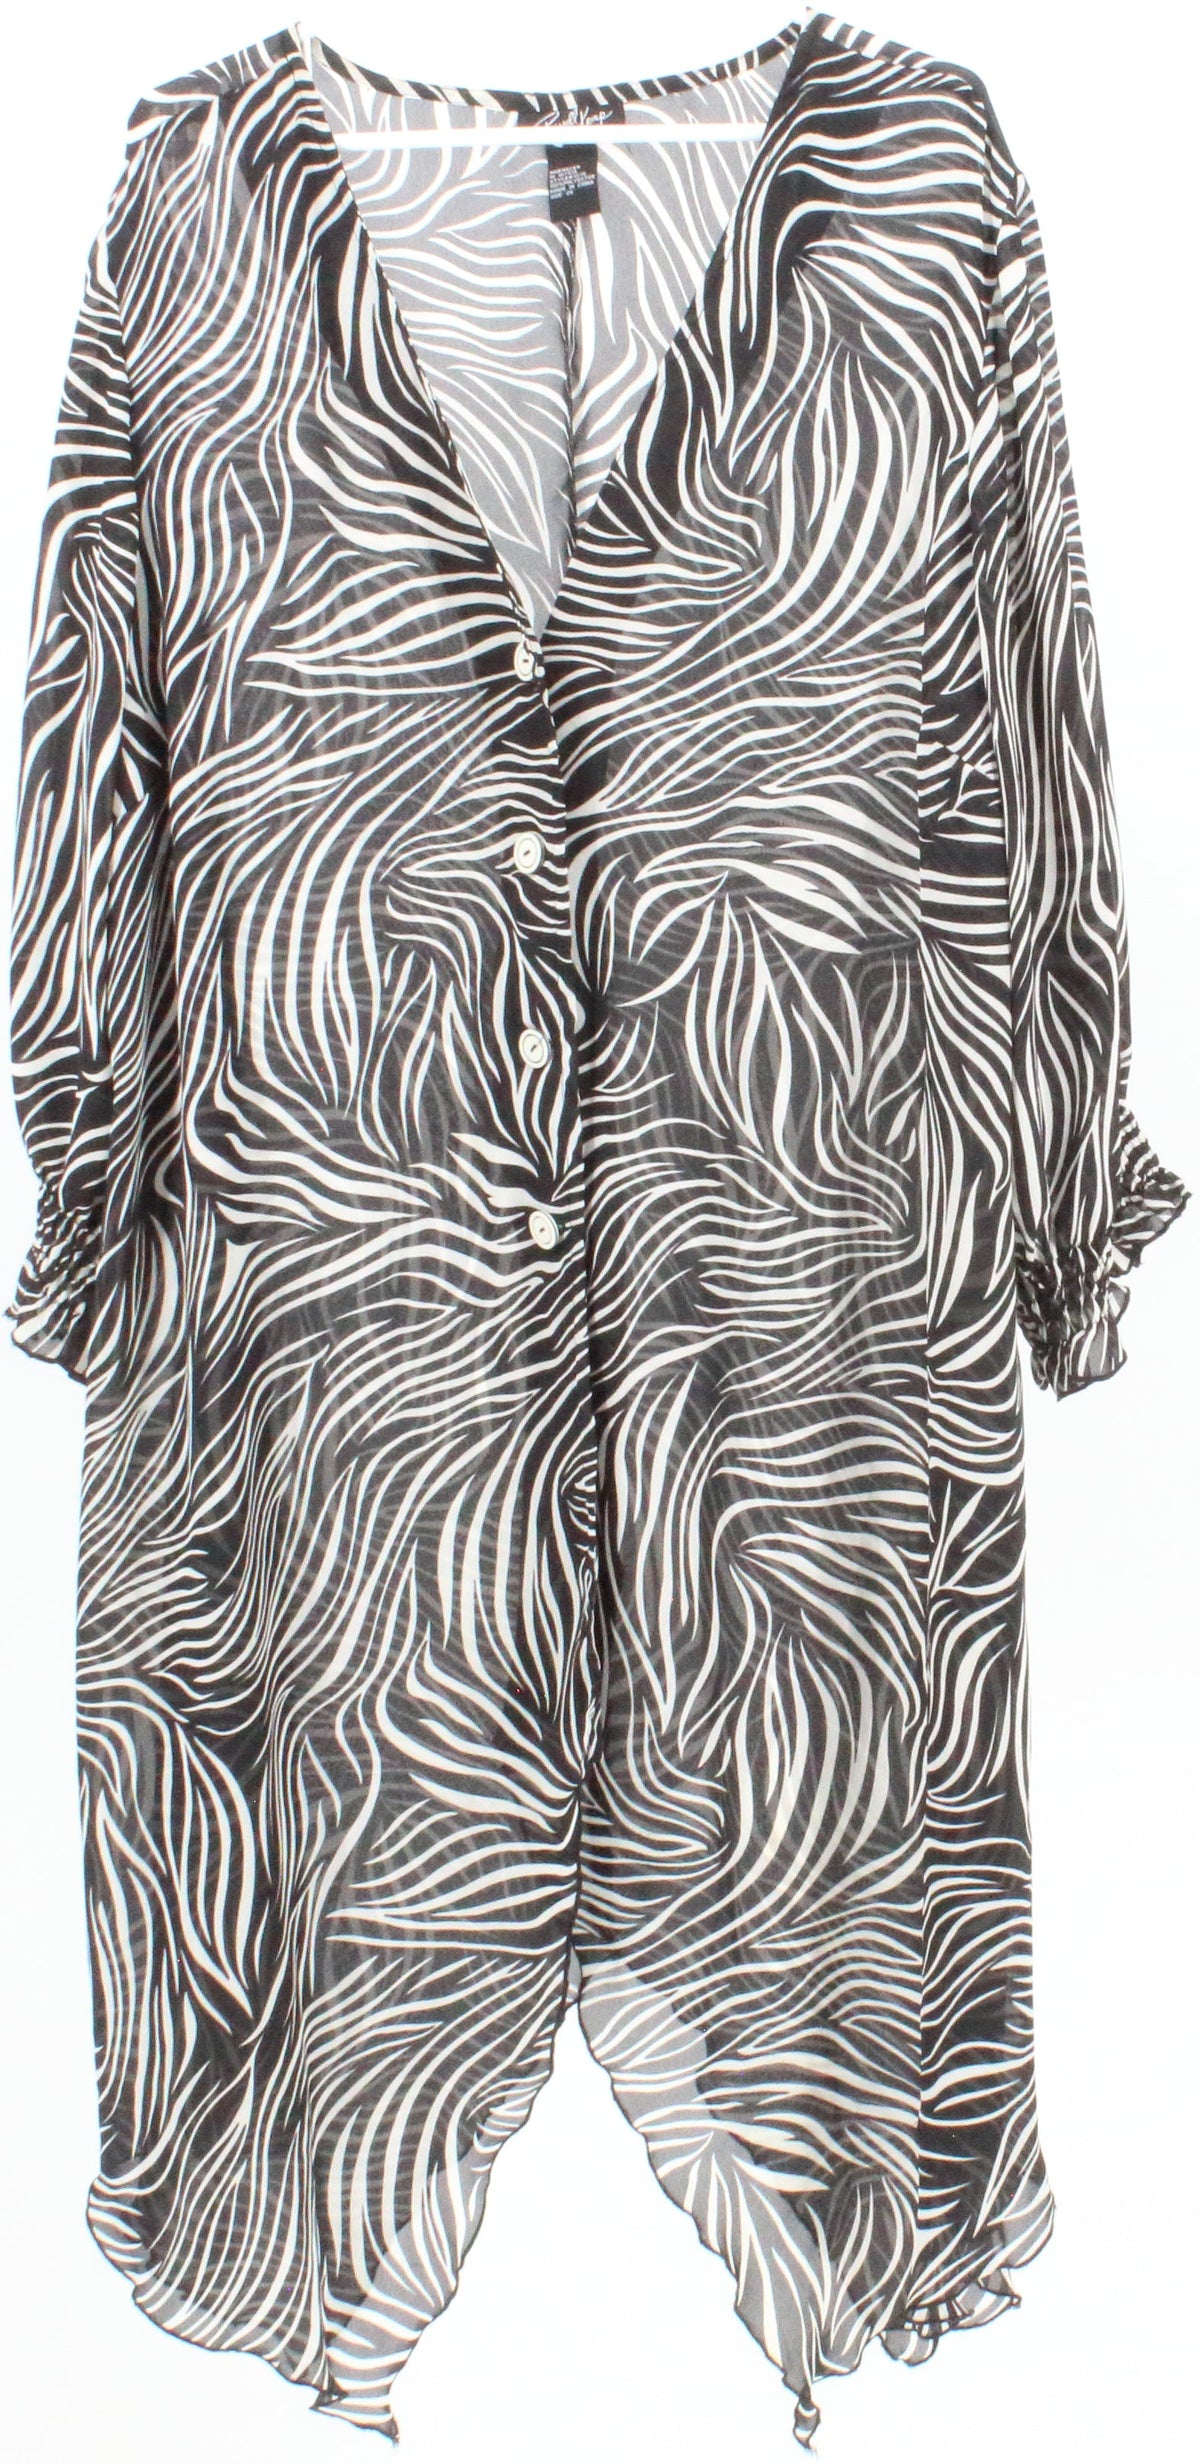 Russel Kemp New York Black and White Print Coverup